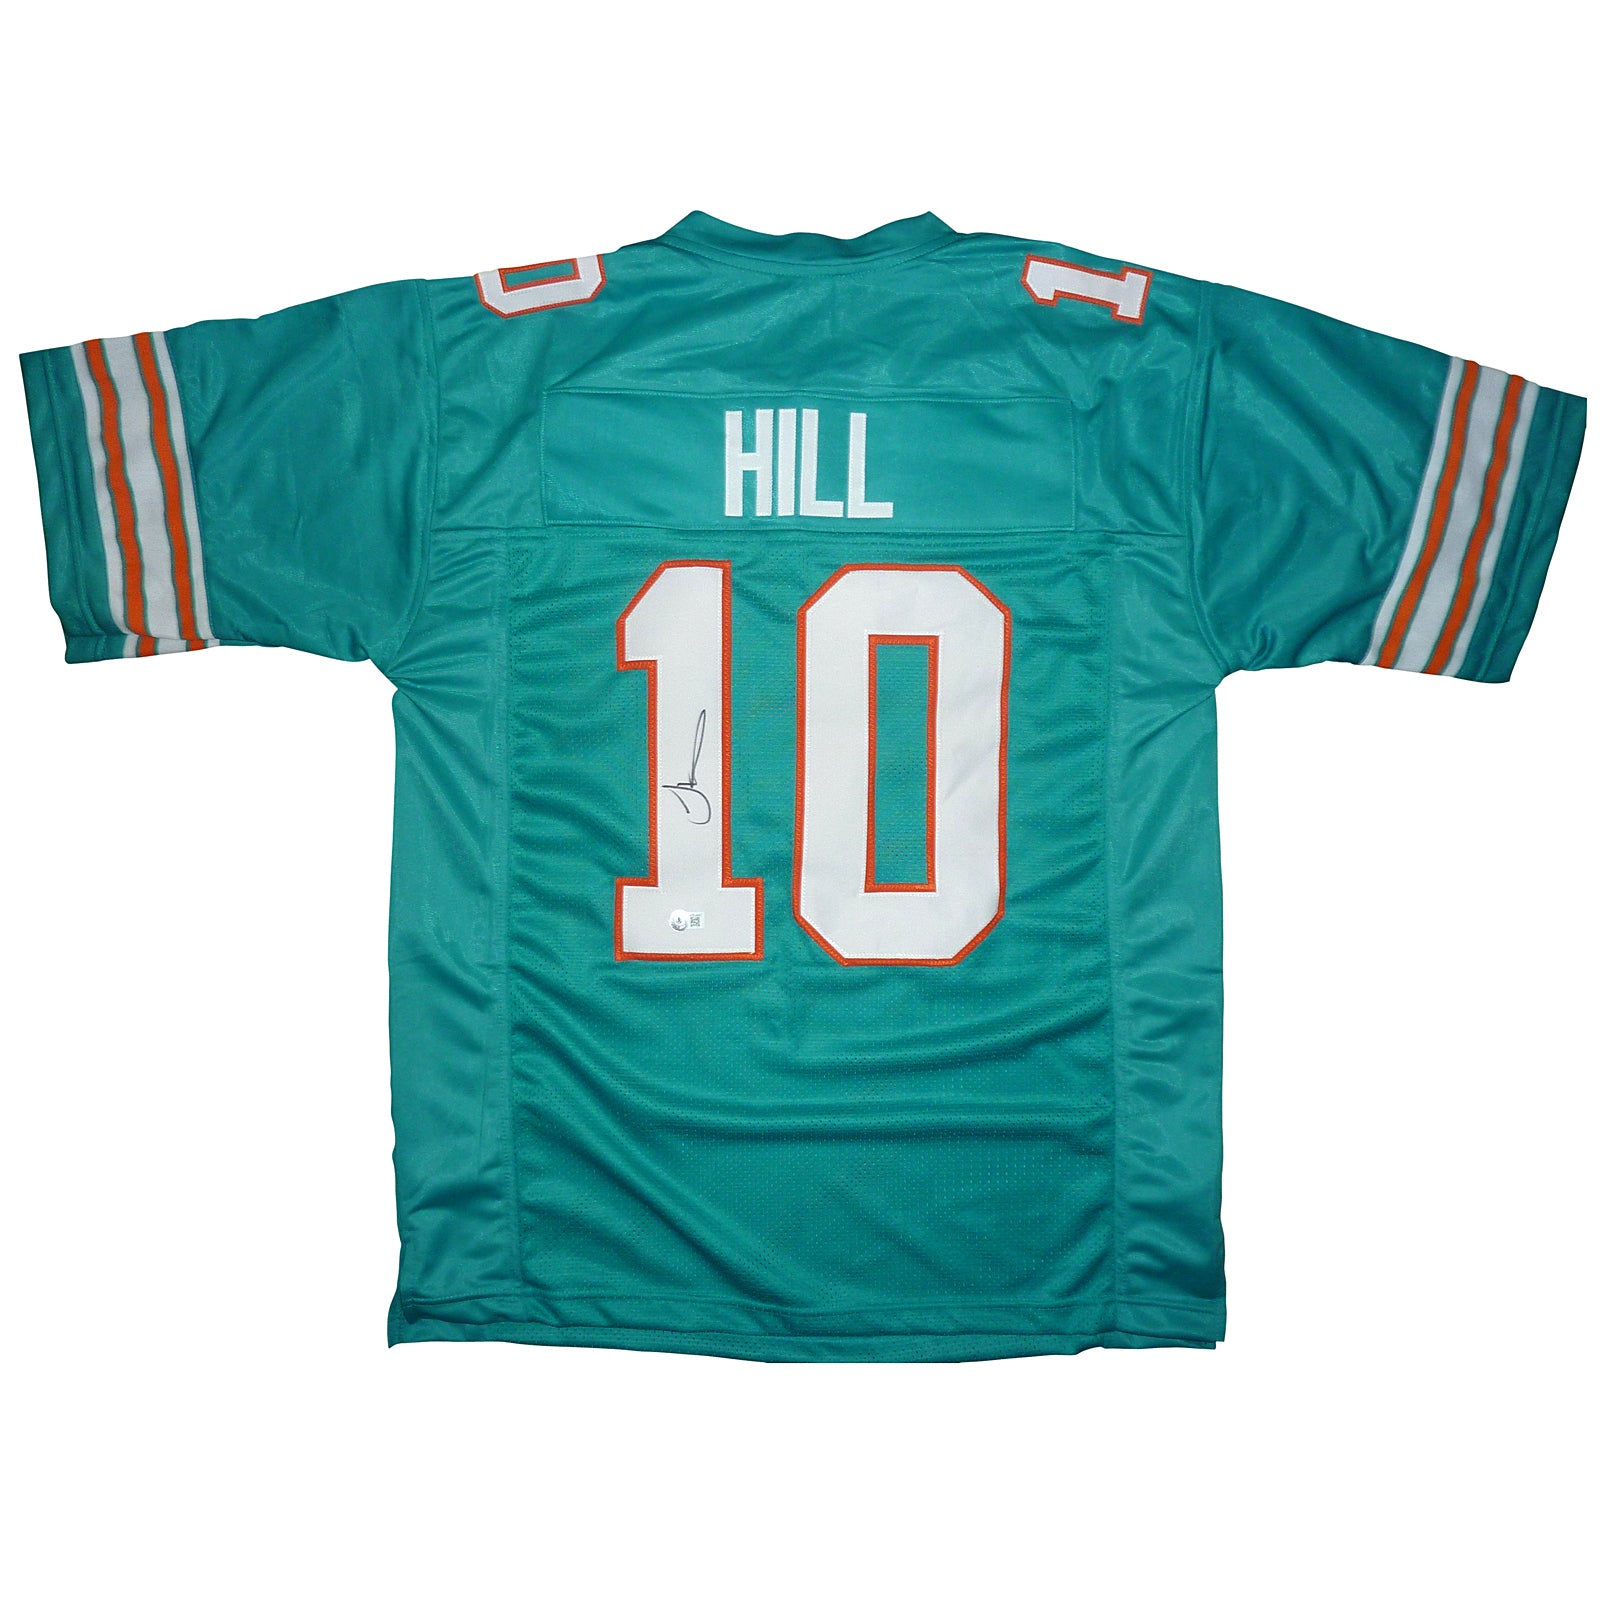 Miami Dolphins Apparel, Dolphins Gear at NFL Shop